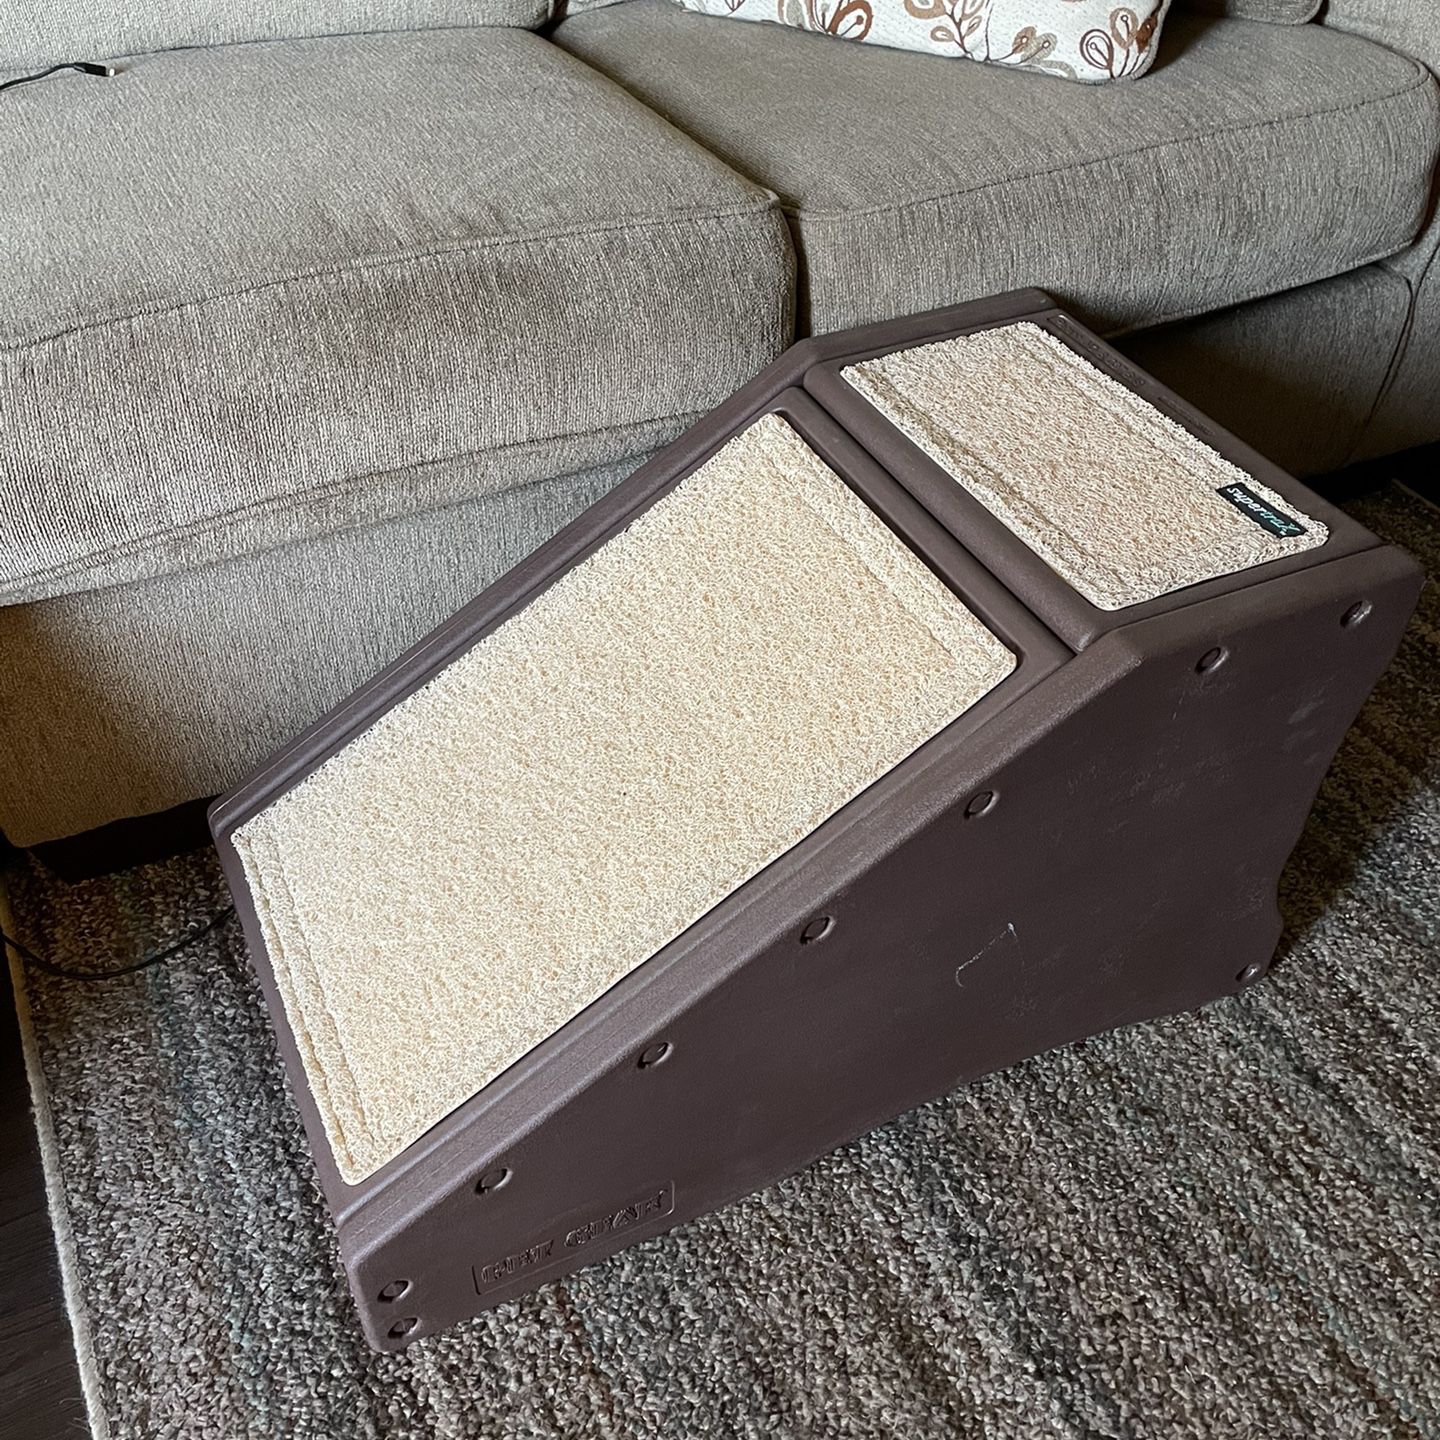 Plastic Pet Ramp For Couch Or Bed